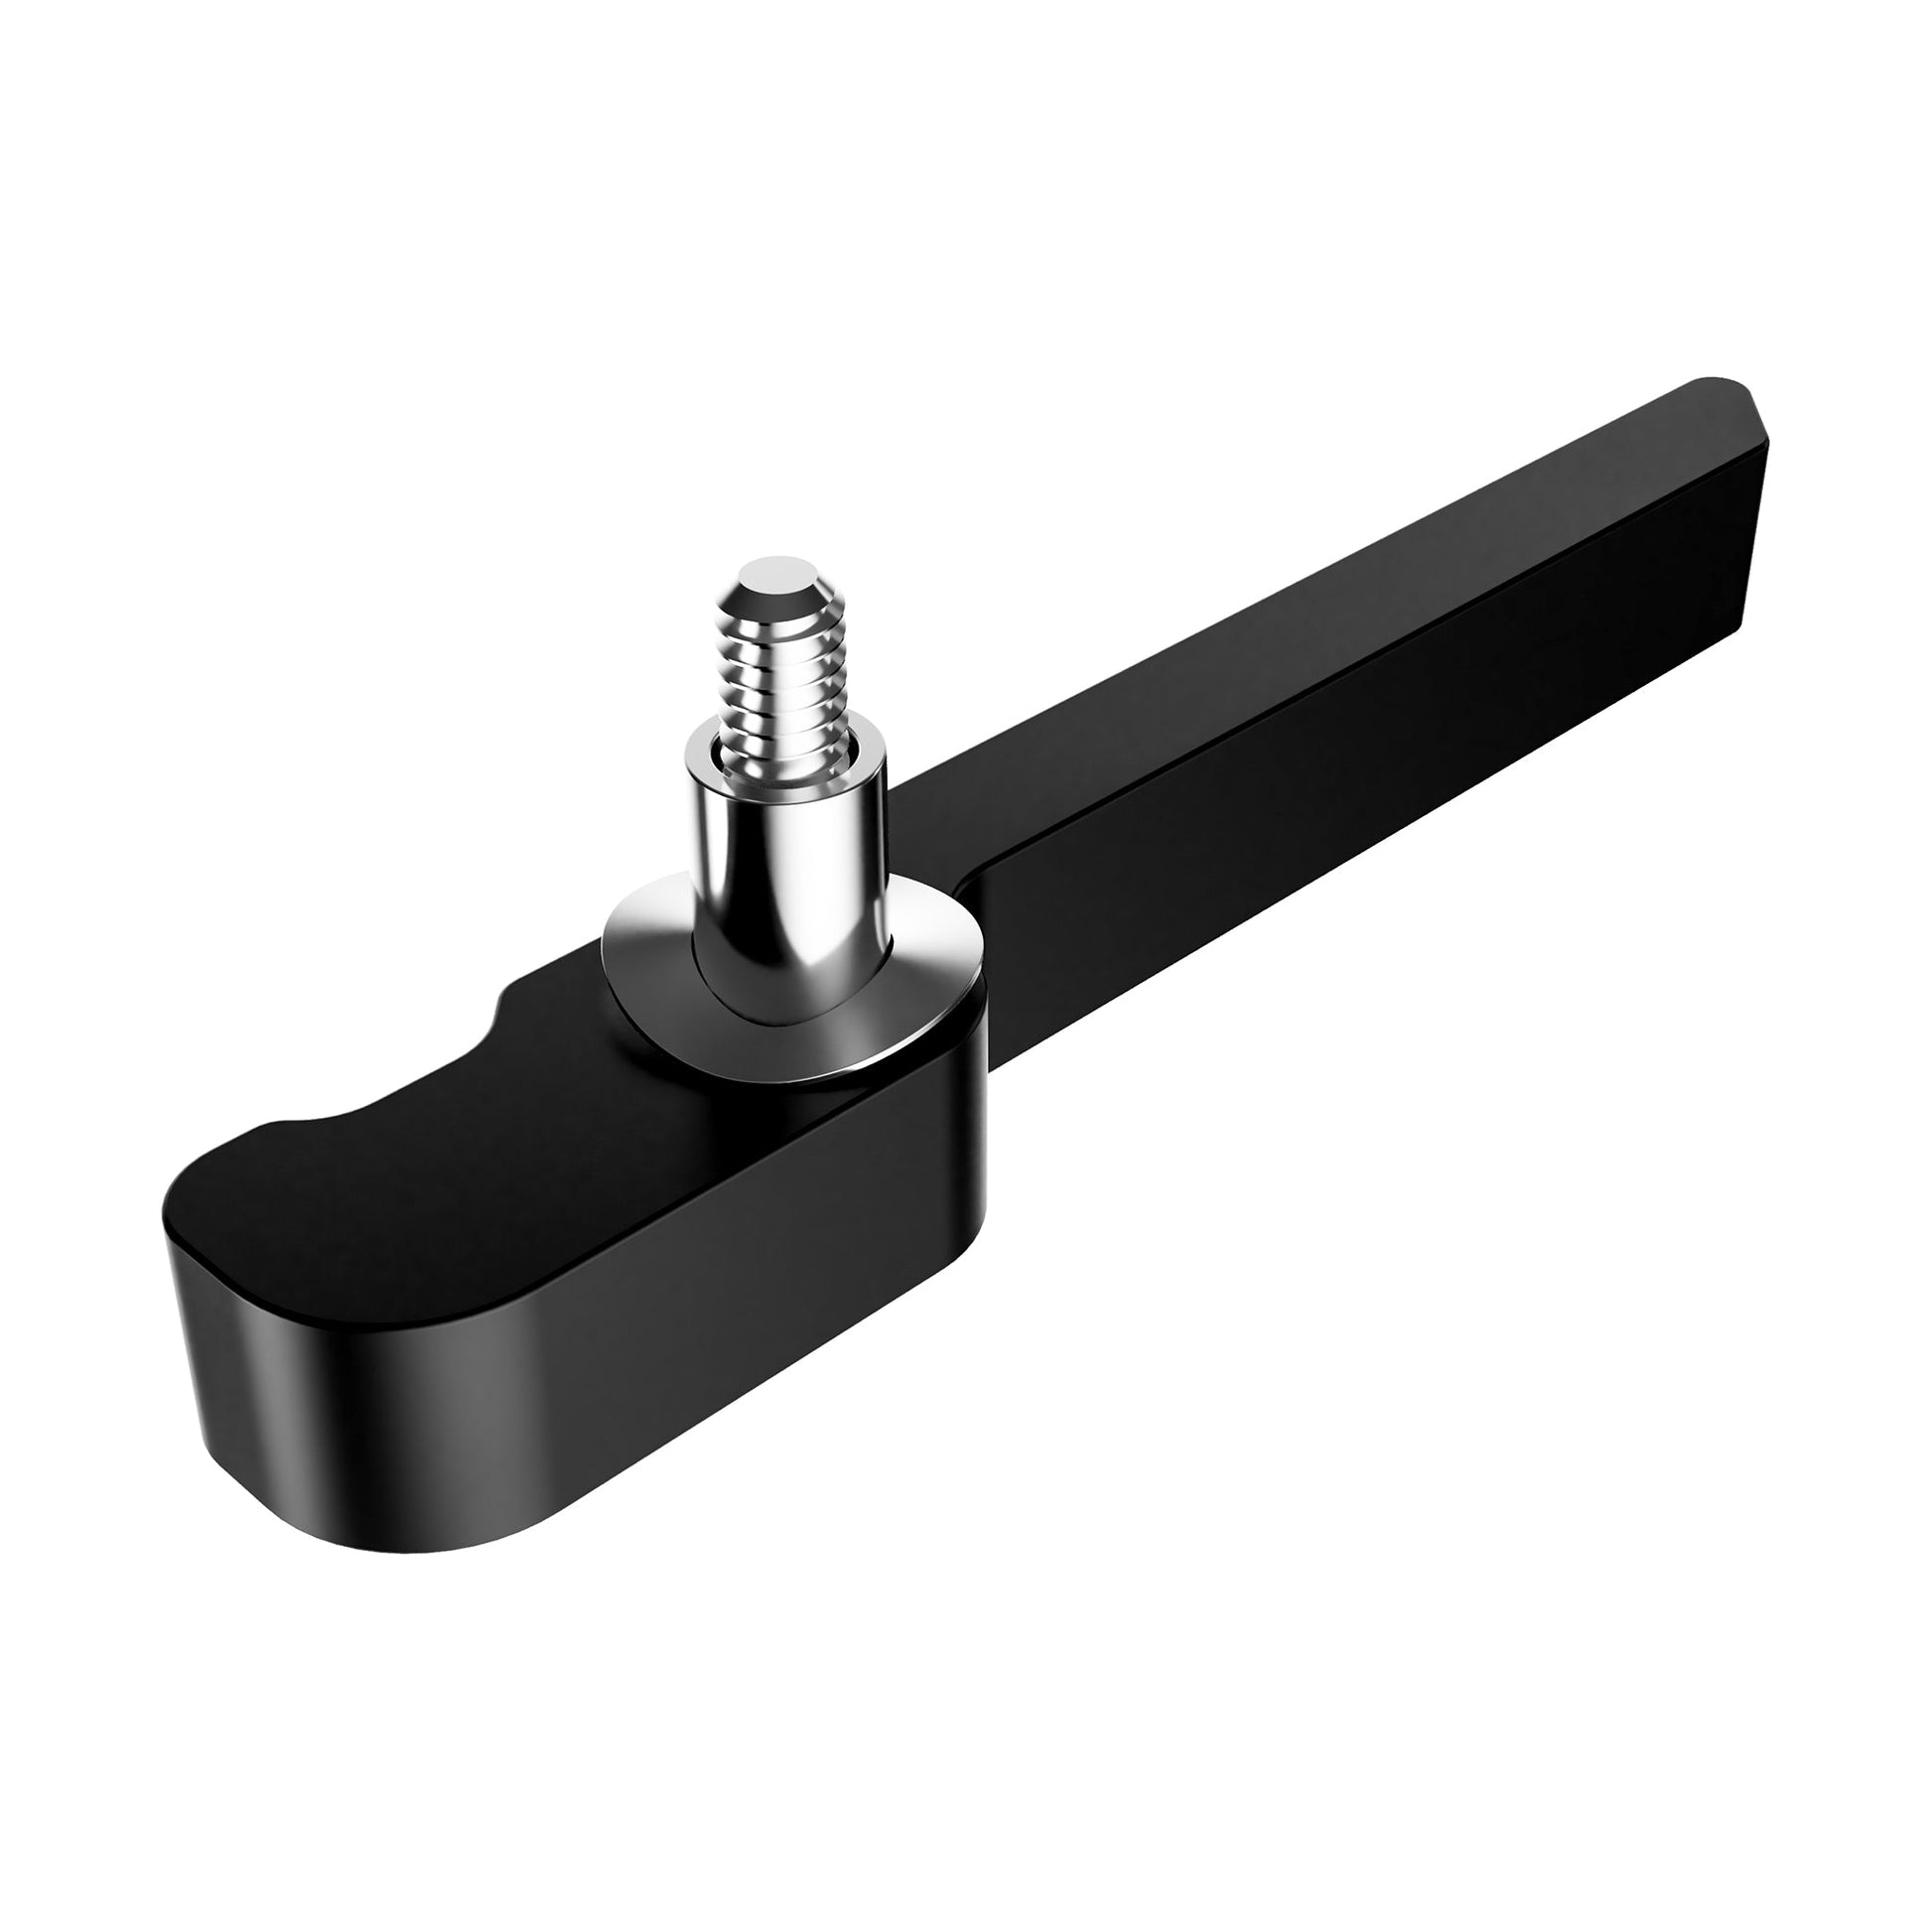 3U Universal Injector/Ejector (#14104), metal handle hardware component for PCB removal, Black Anodized Finish